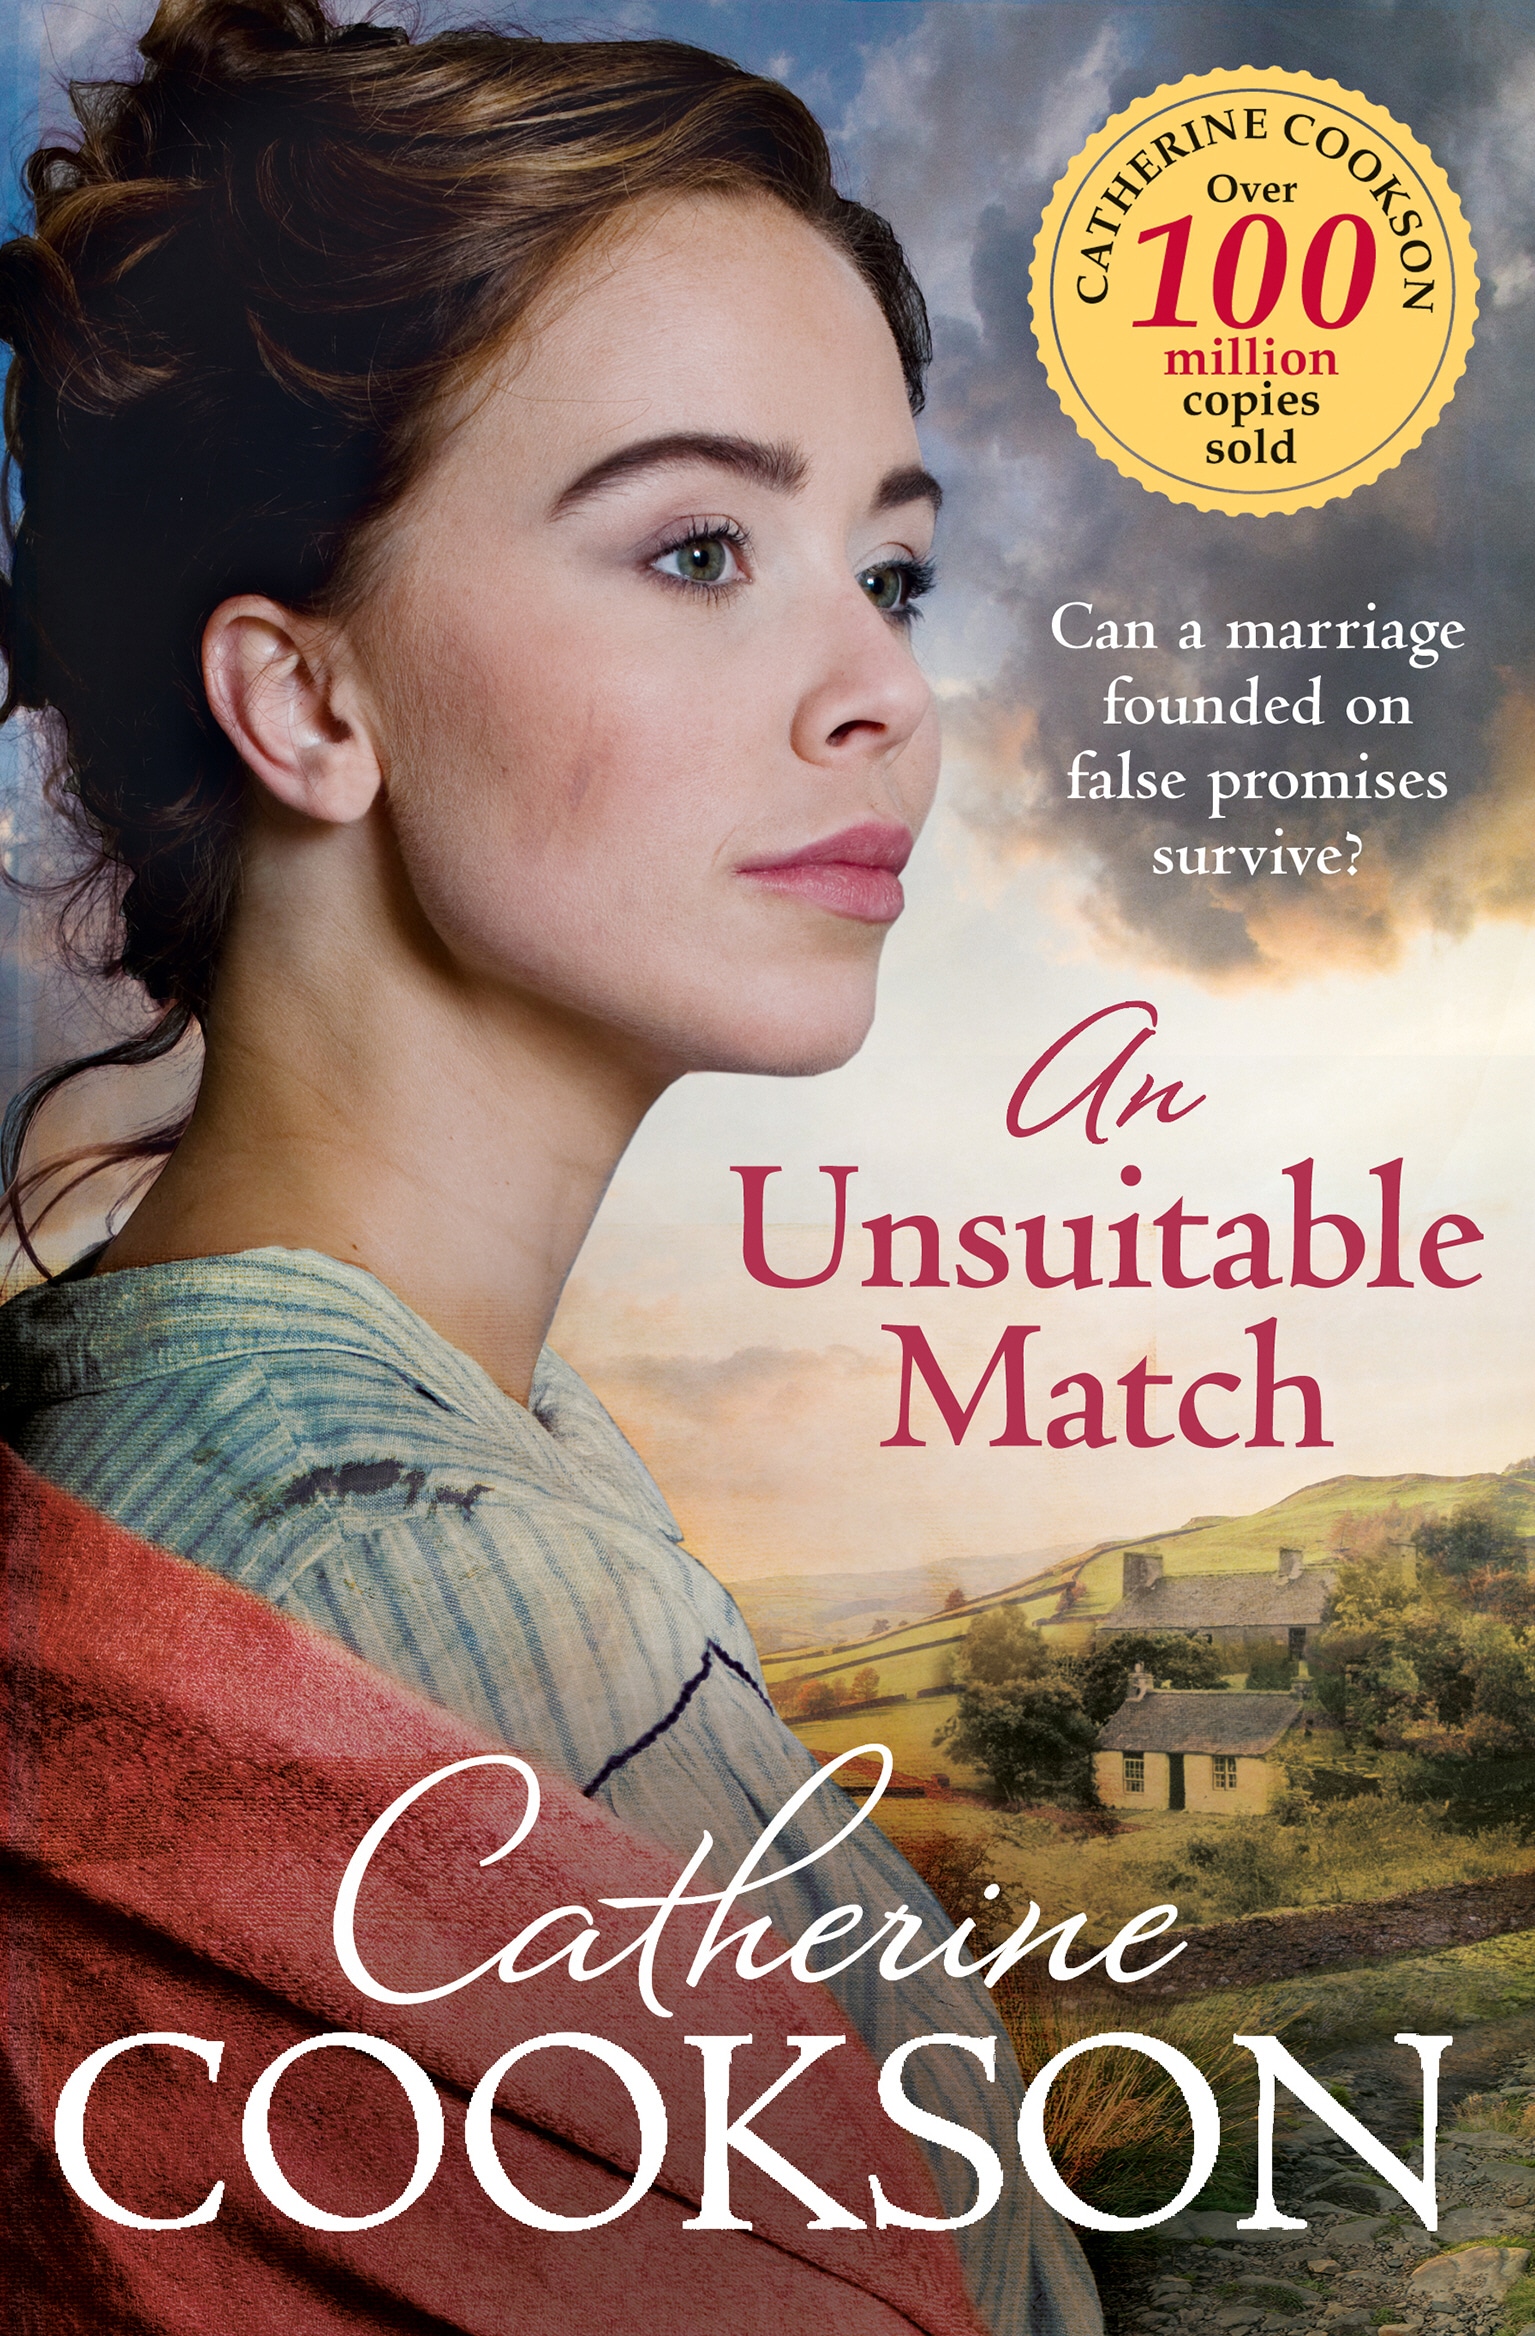 Book “An Unsuitable Match” by Catherine Cookson — September 3, 2020